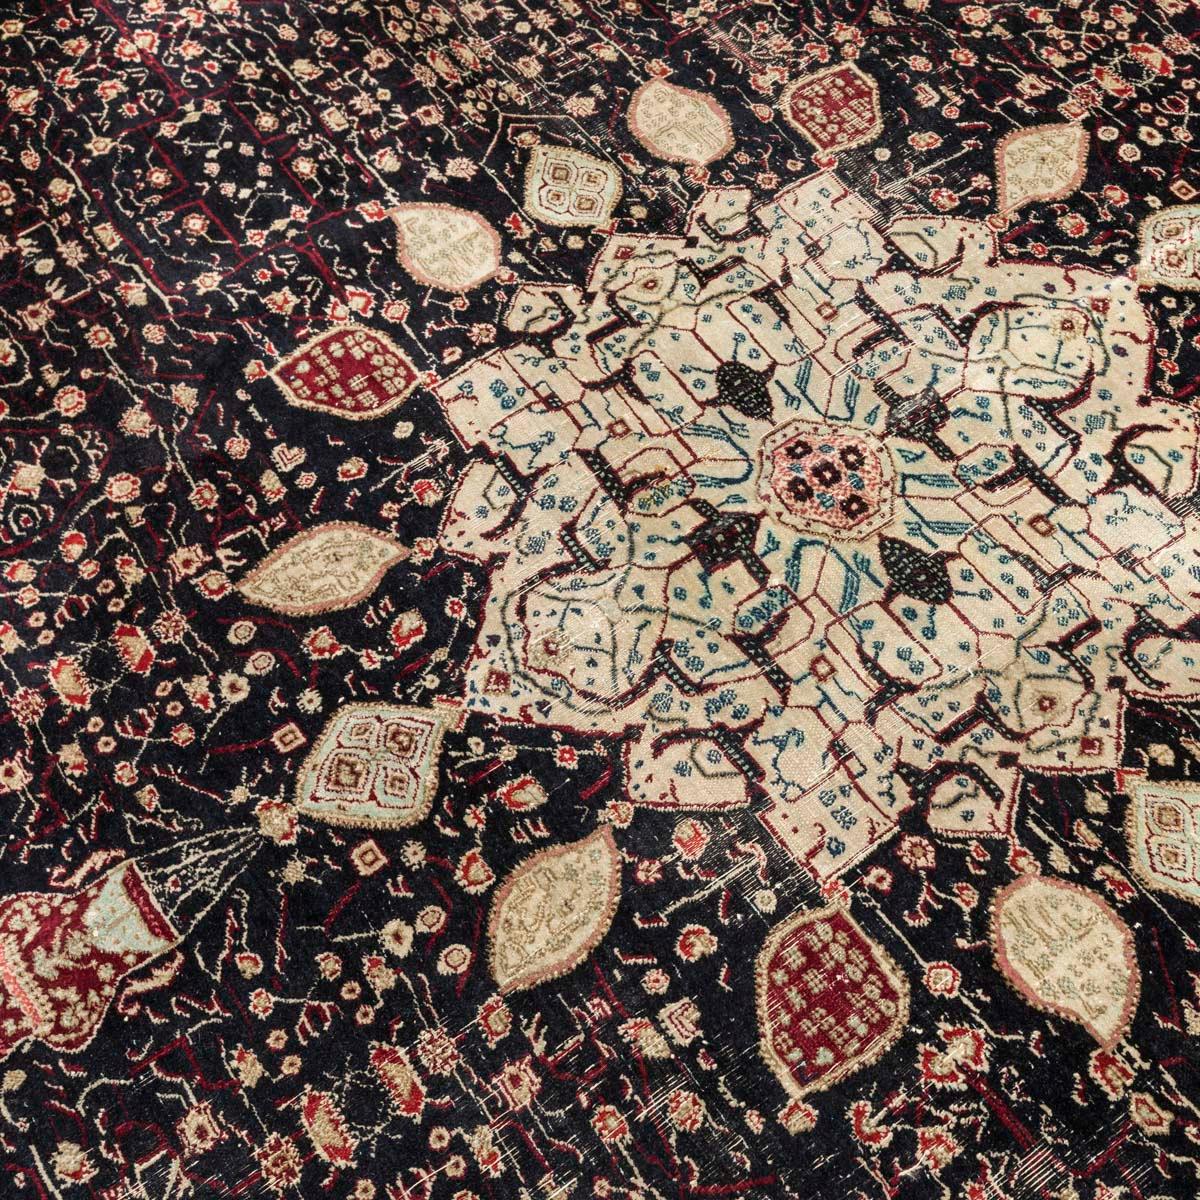 Mid-20th Century Antique Agra India Wool Rug. Circa. 1930. 3.50 x 2.70 m. For Sale